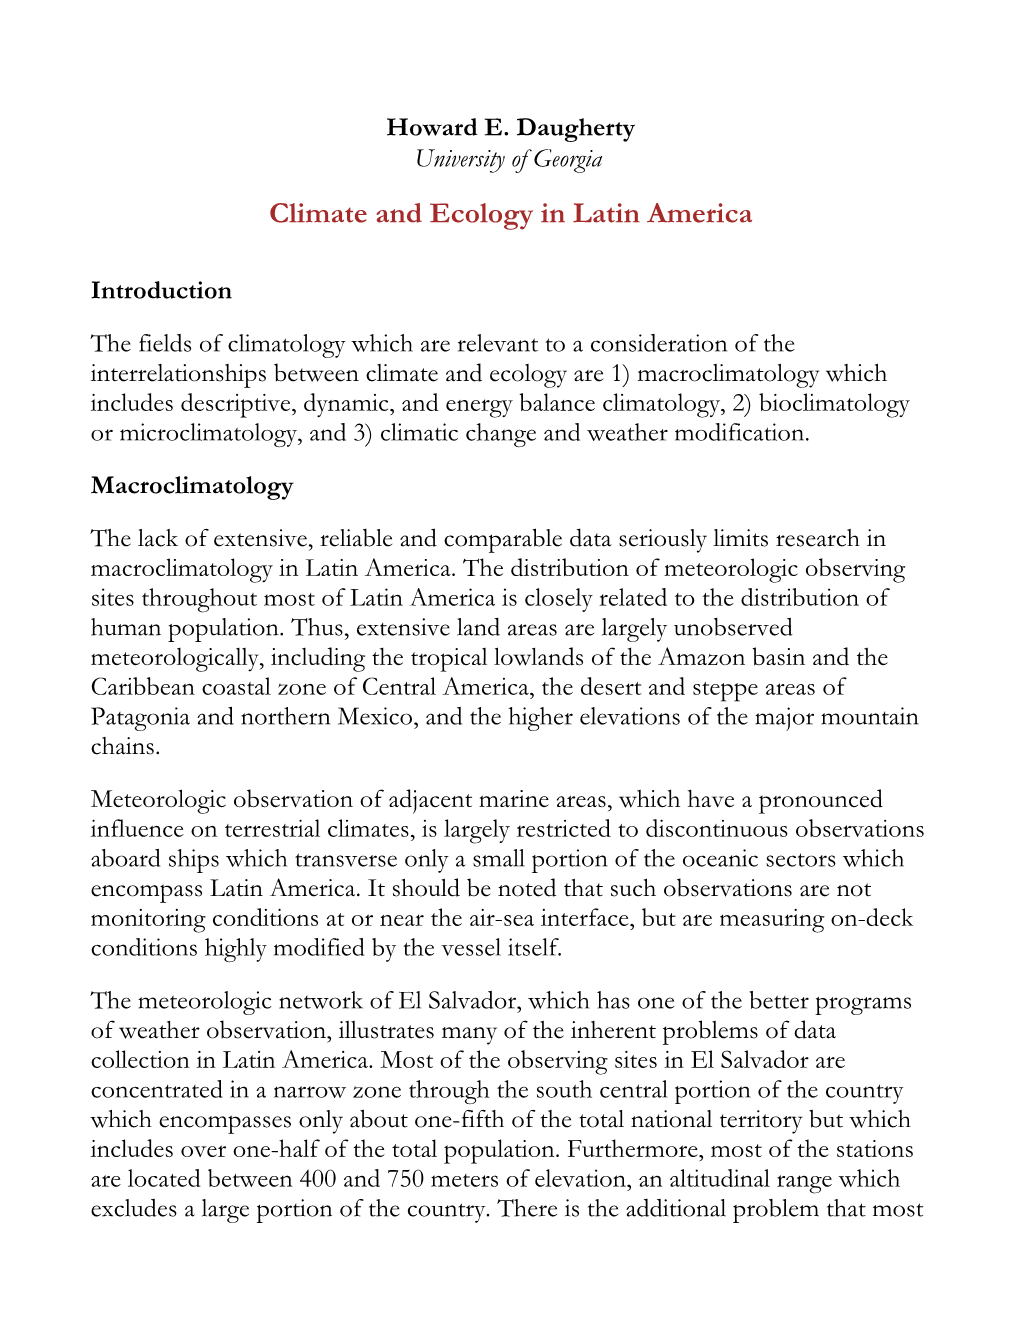 Climate and Ecology in Latin America